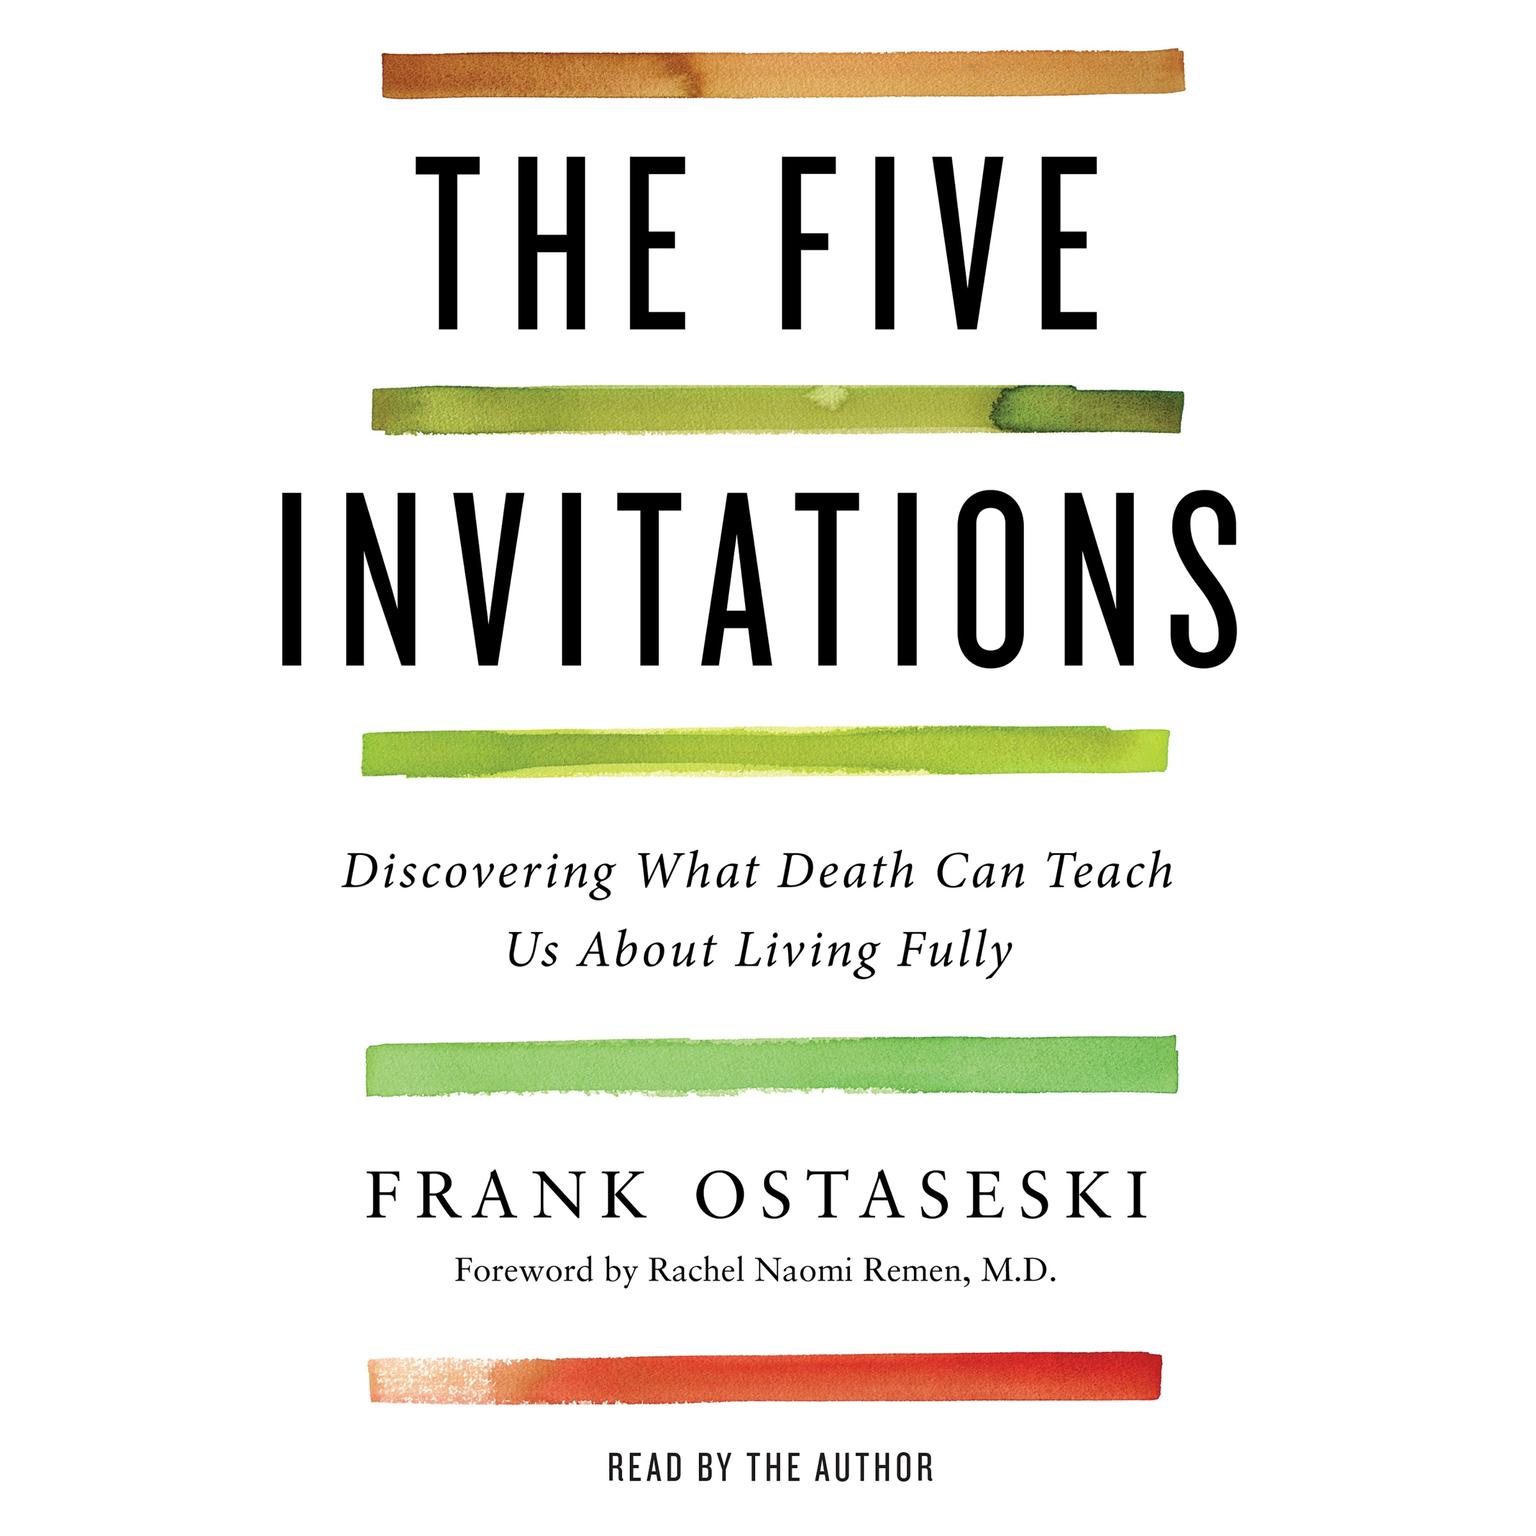 The Five Invitations: Discovering What Death Can Teach Us About Living Fully Audiobook, by Frank Ostaseski